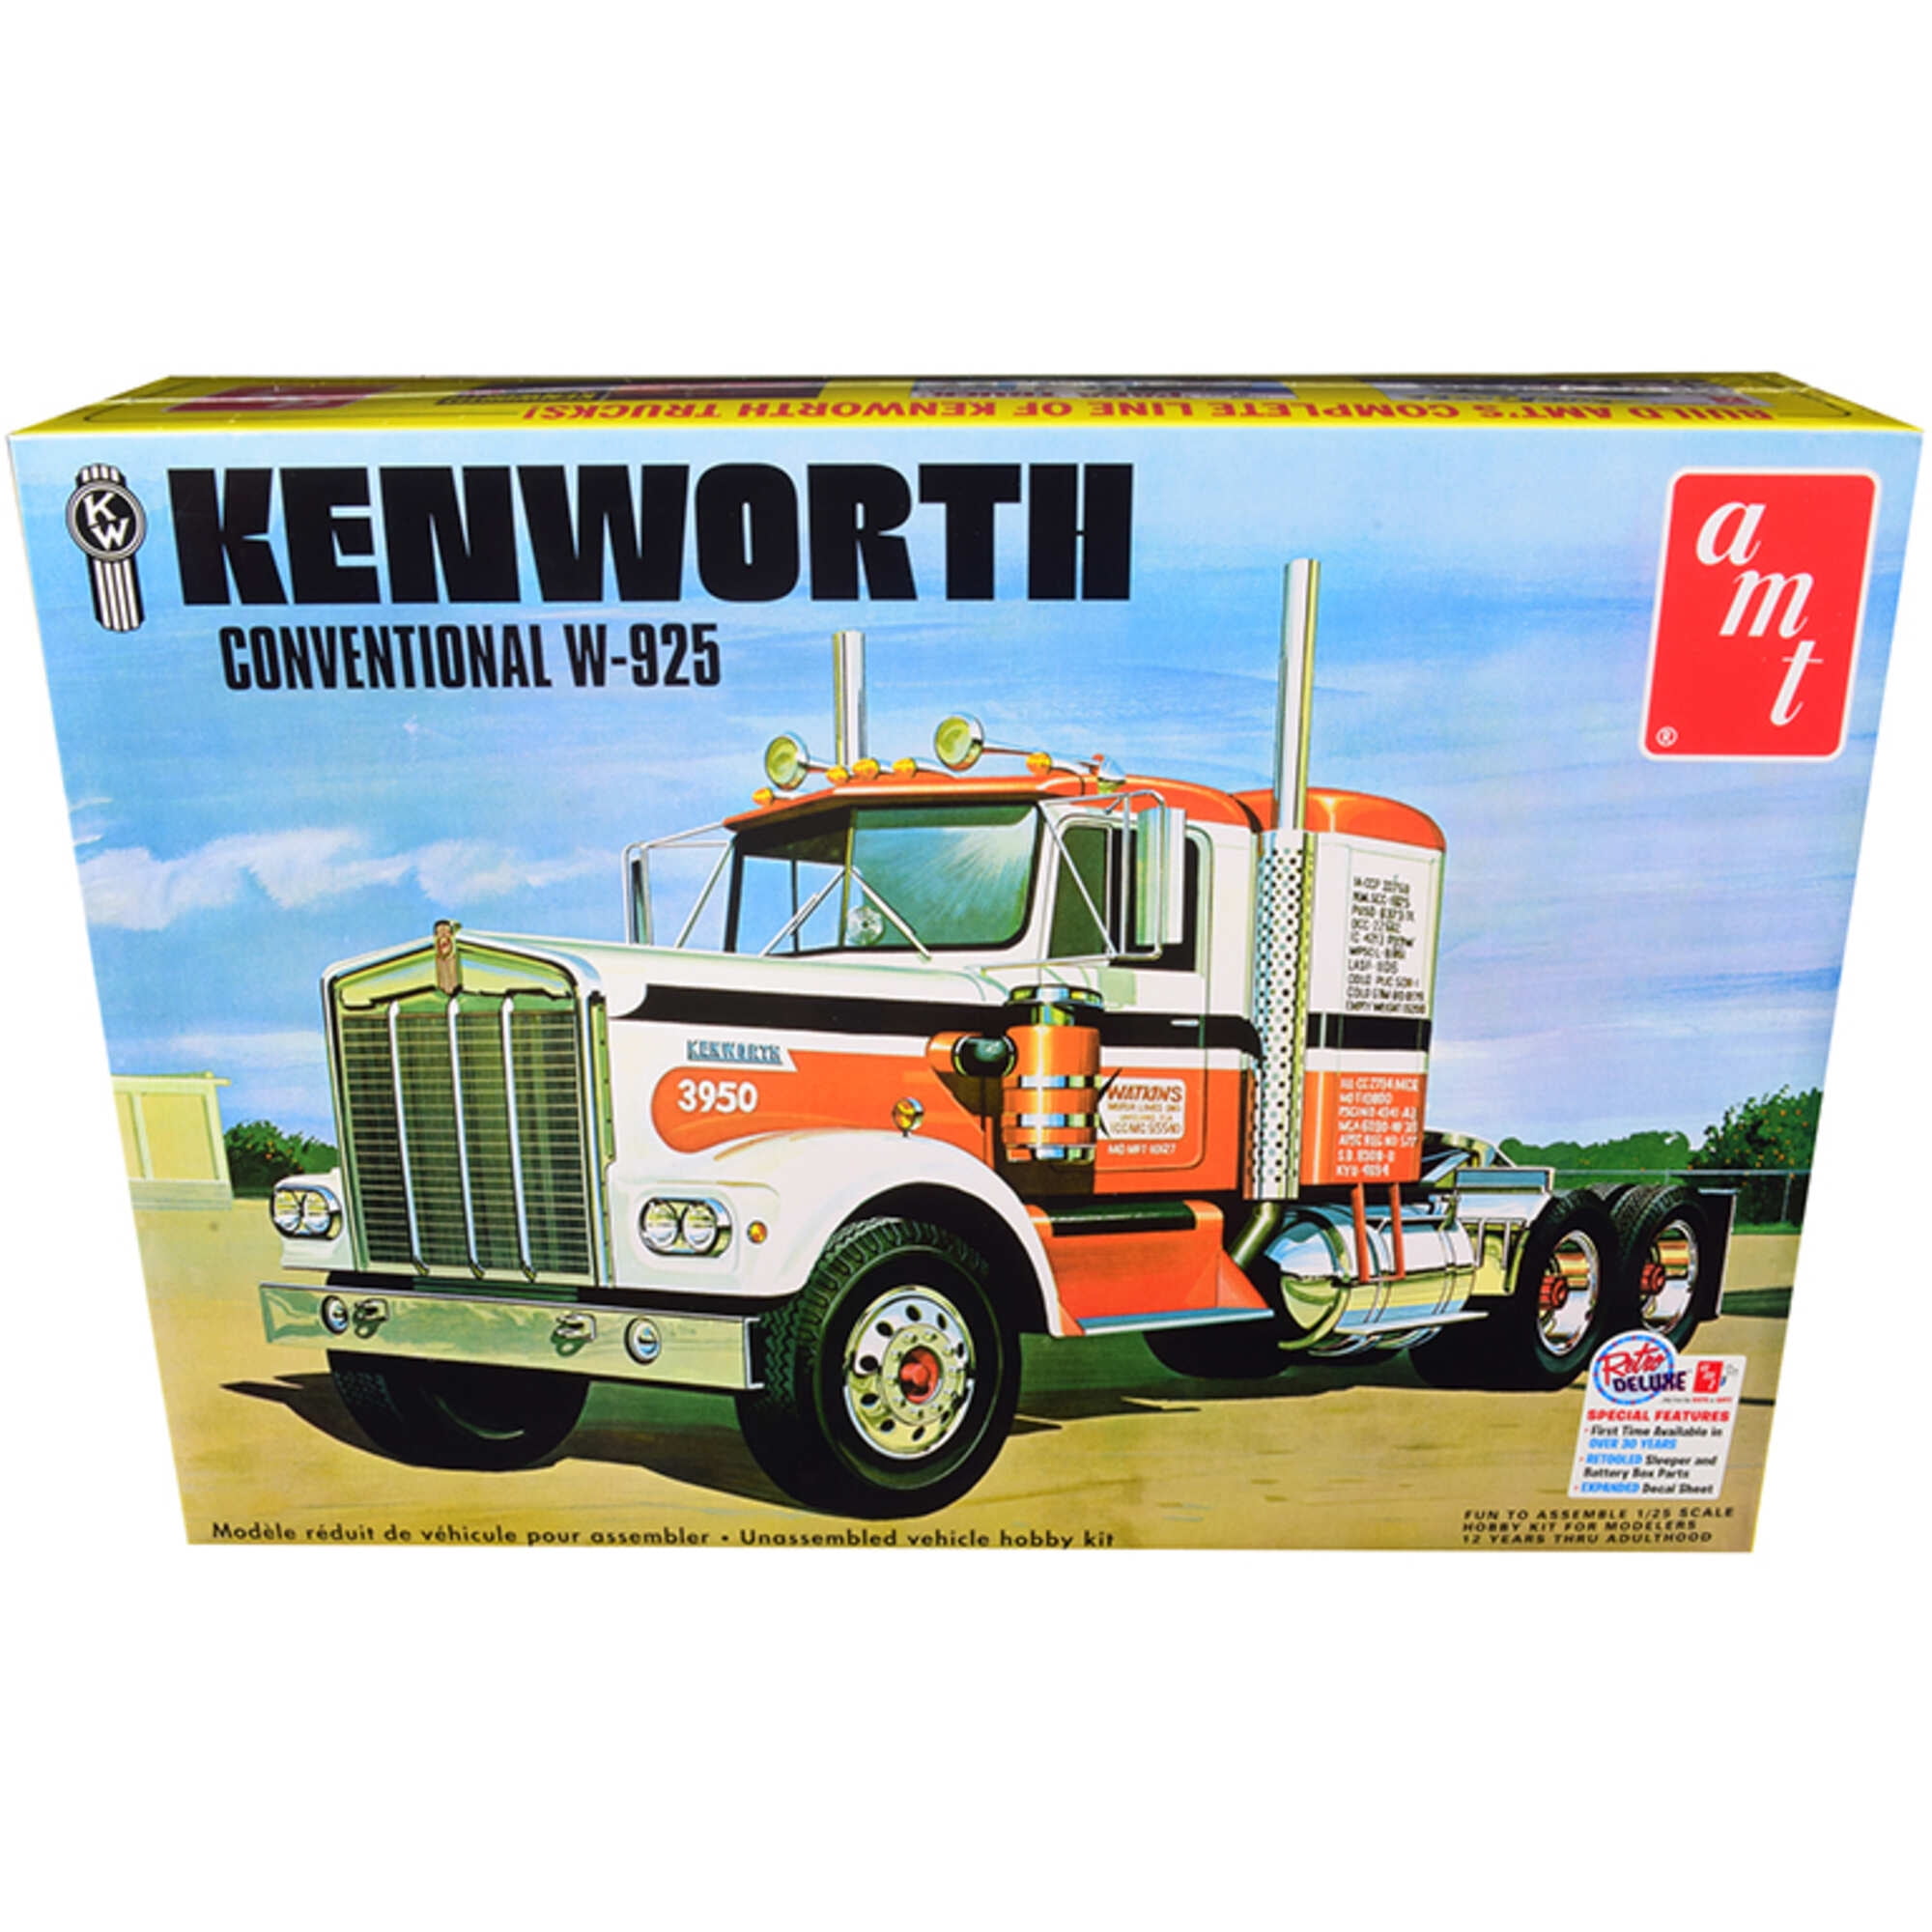 1021 Kenworth W-925 Conventional Plastic Tractor Toys, 10 Years Above